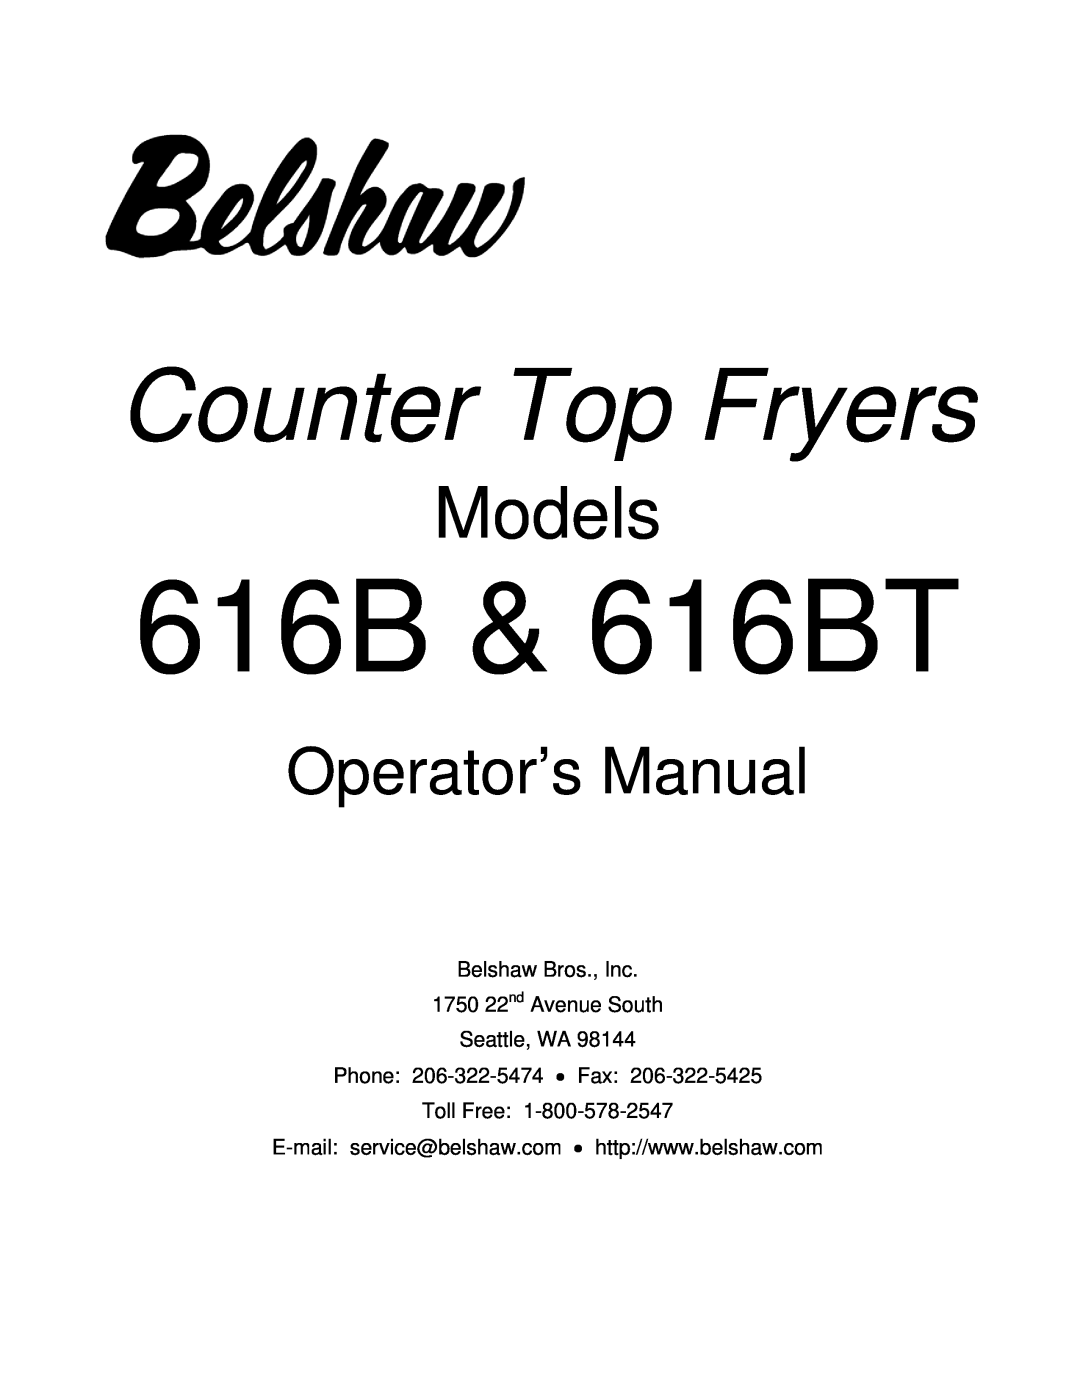 Belshaw Brothers manual Operator’s Manual, 616B & 616BT, Counter Top Fryers, Models 